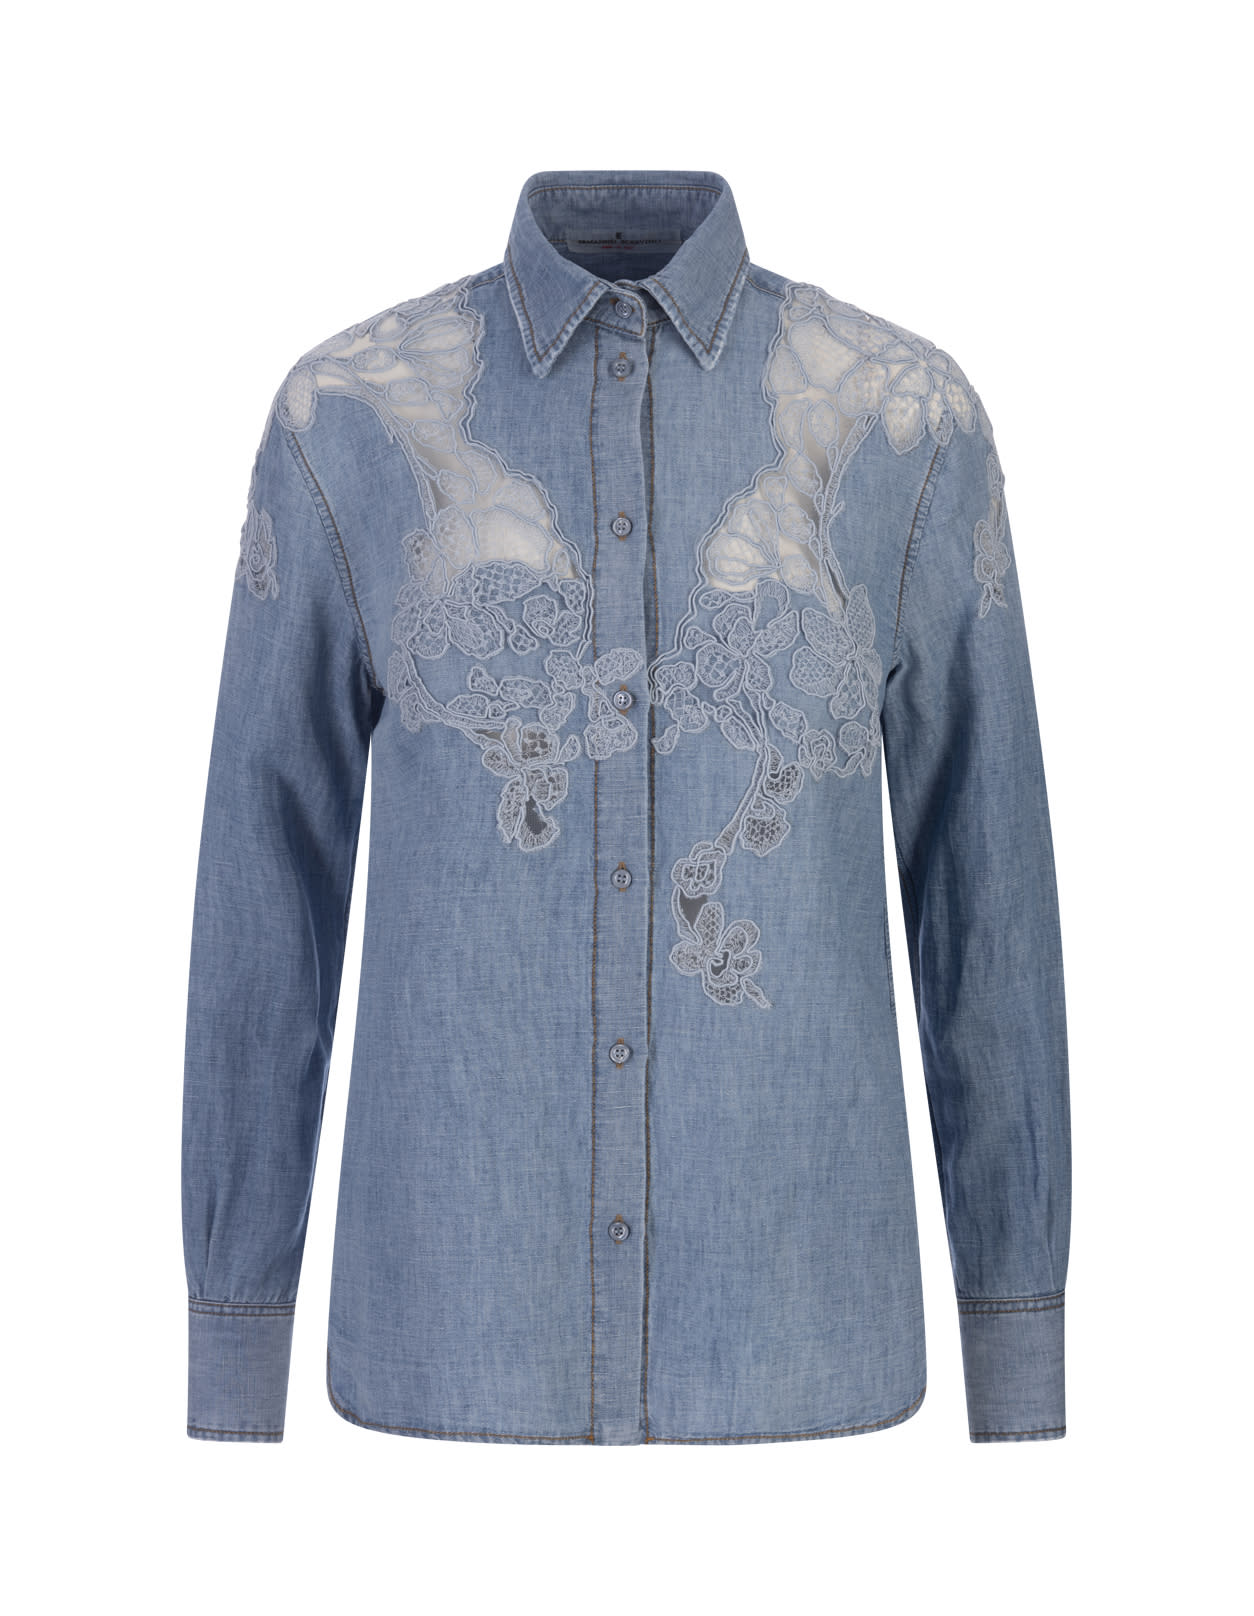 Ermanno Scervino Jeans Shirt With Lace In Blue